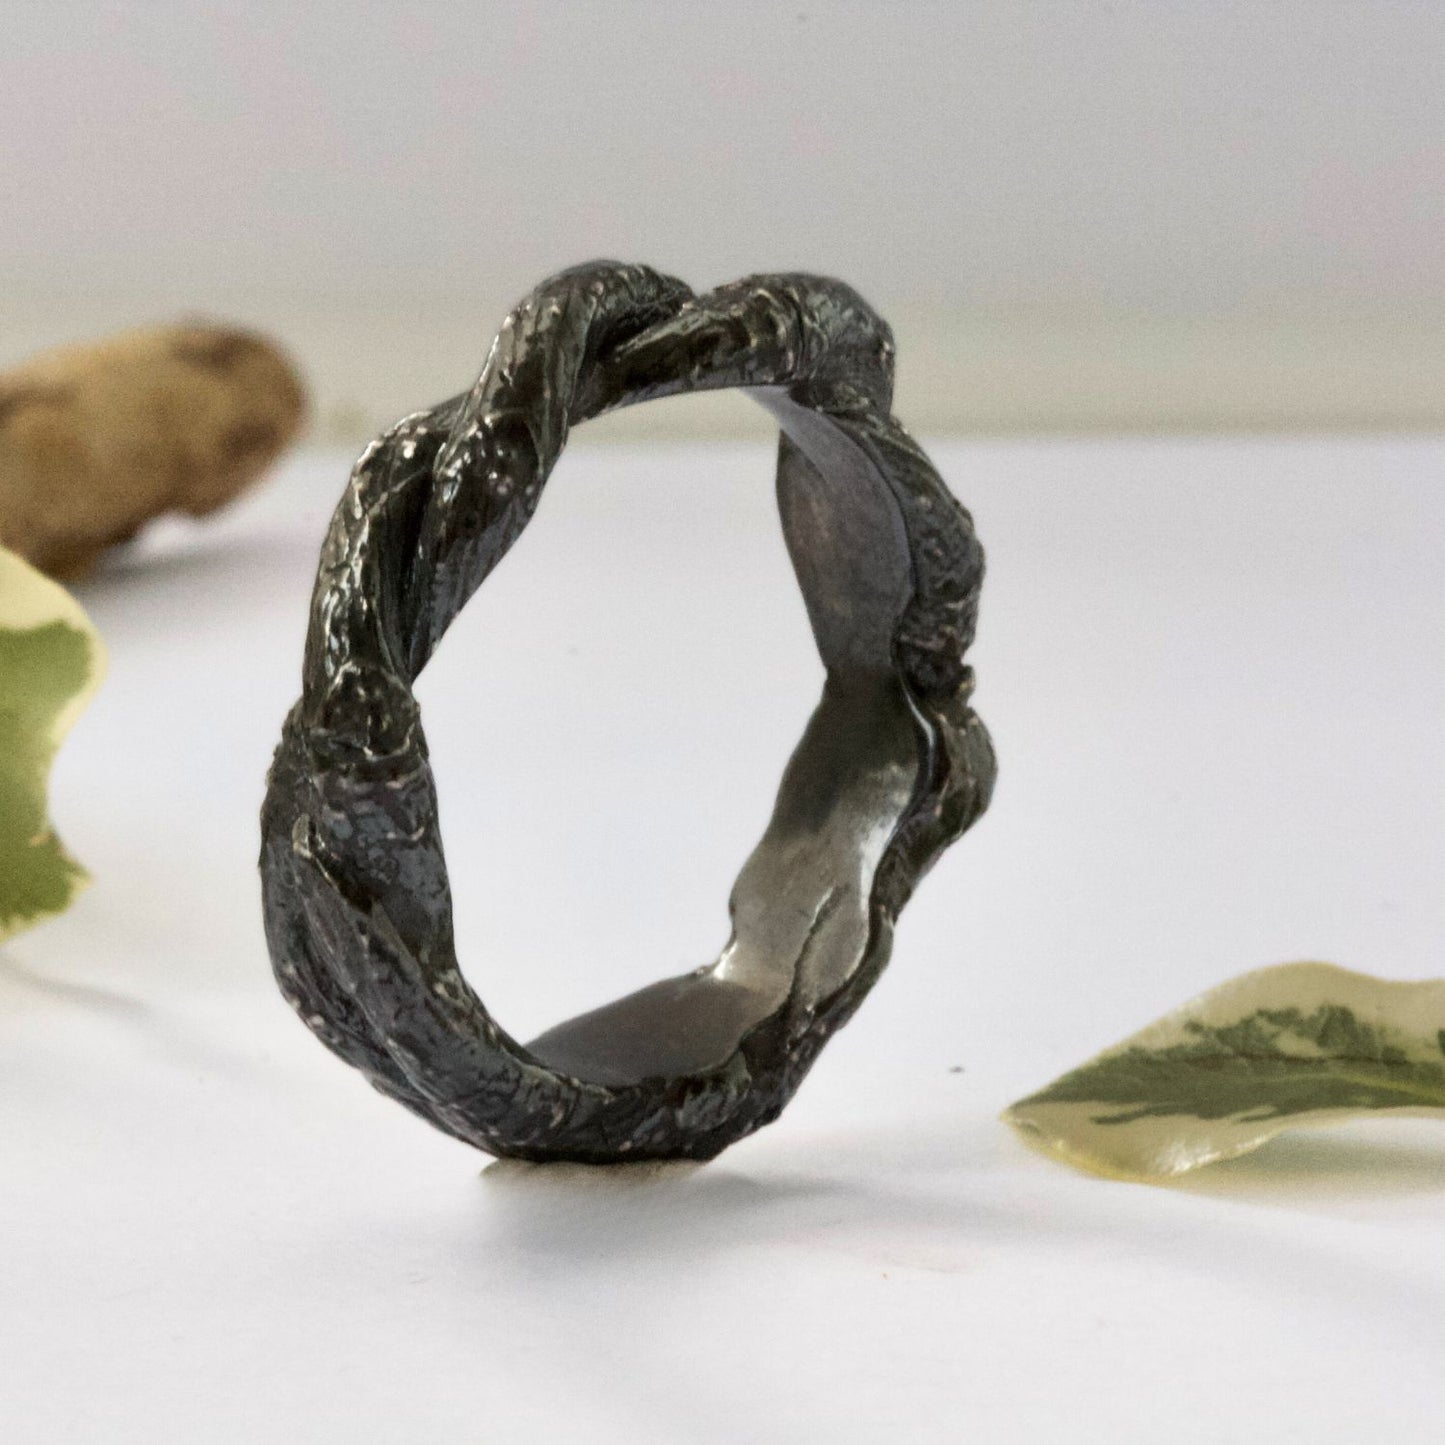 Entwined Branch Ring, Rustic Ring, Silver Tree Branch Ring, Thumb Ring